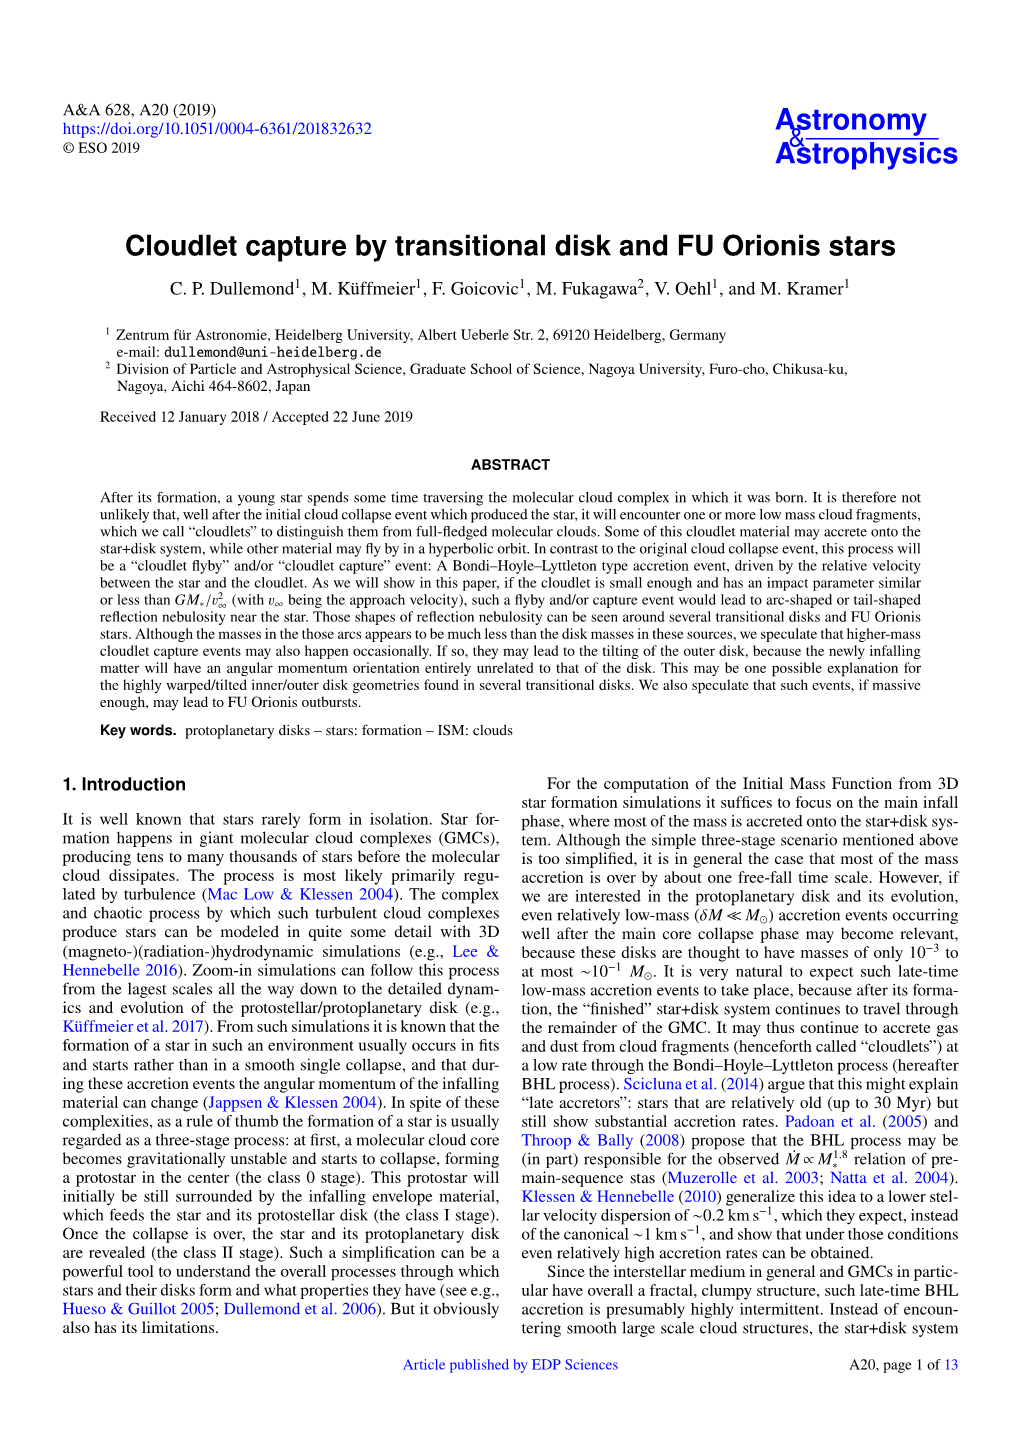 Cloudlet Capture by Transitional Disk and FU Orionis Stars C